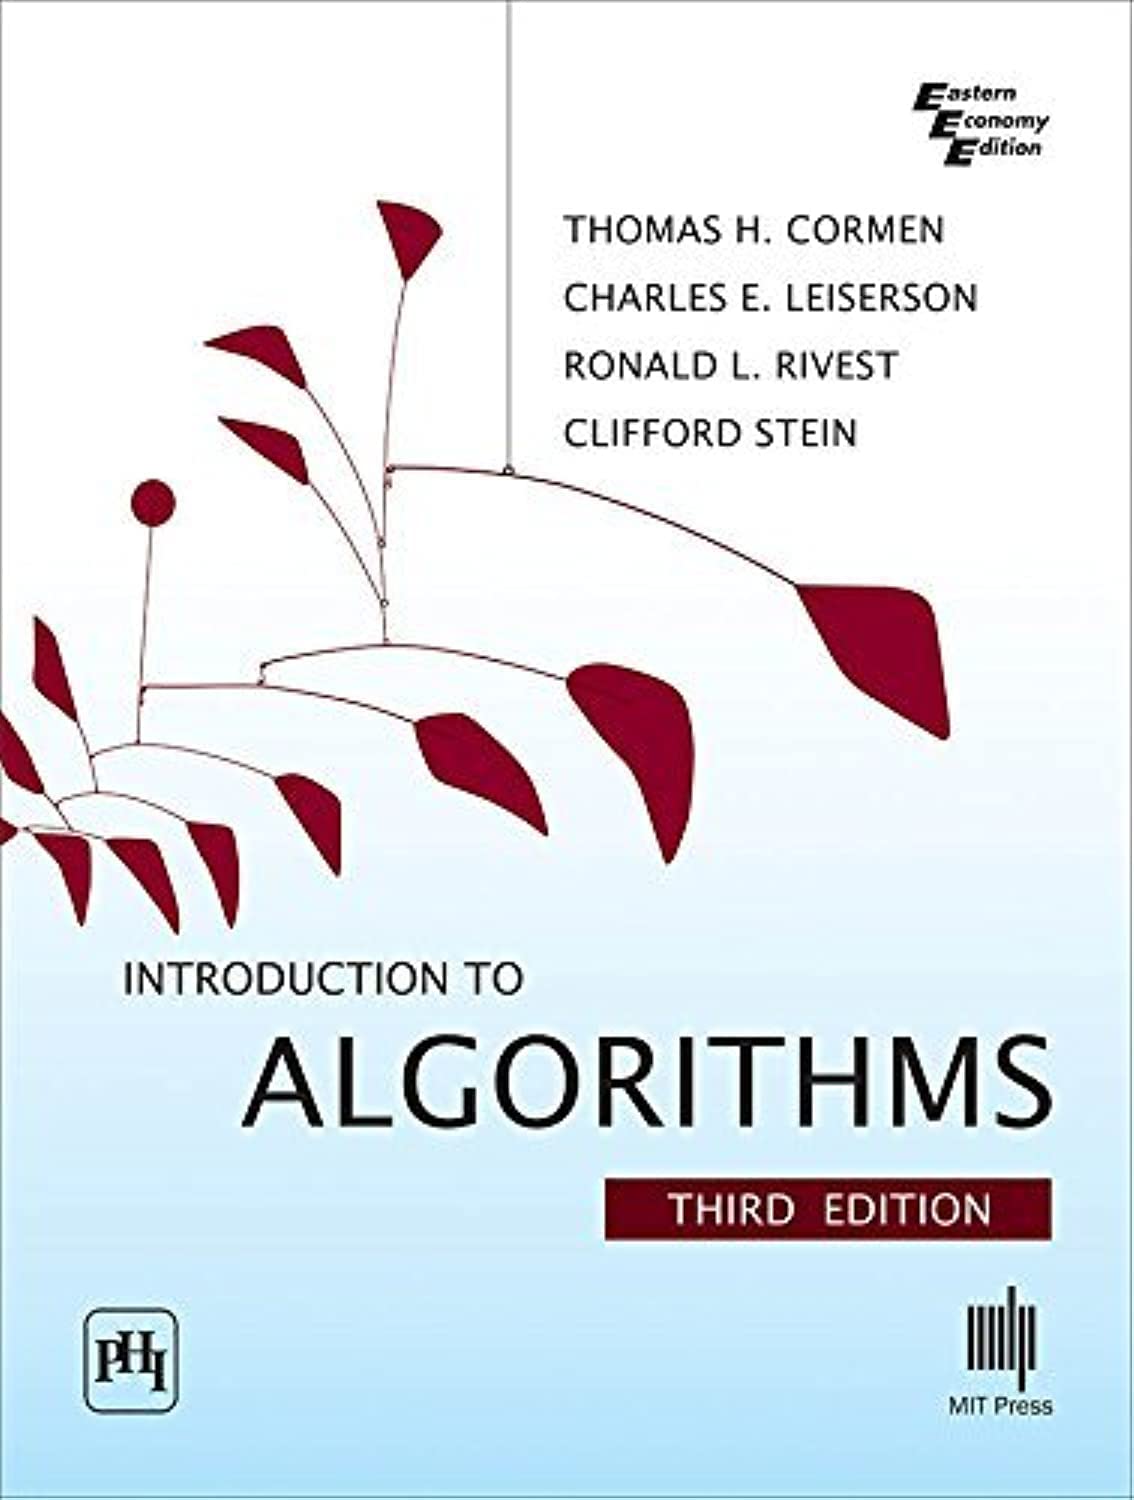 Introduction to Algorithms (Eastern Economy Edition)